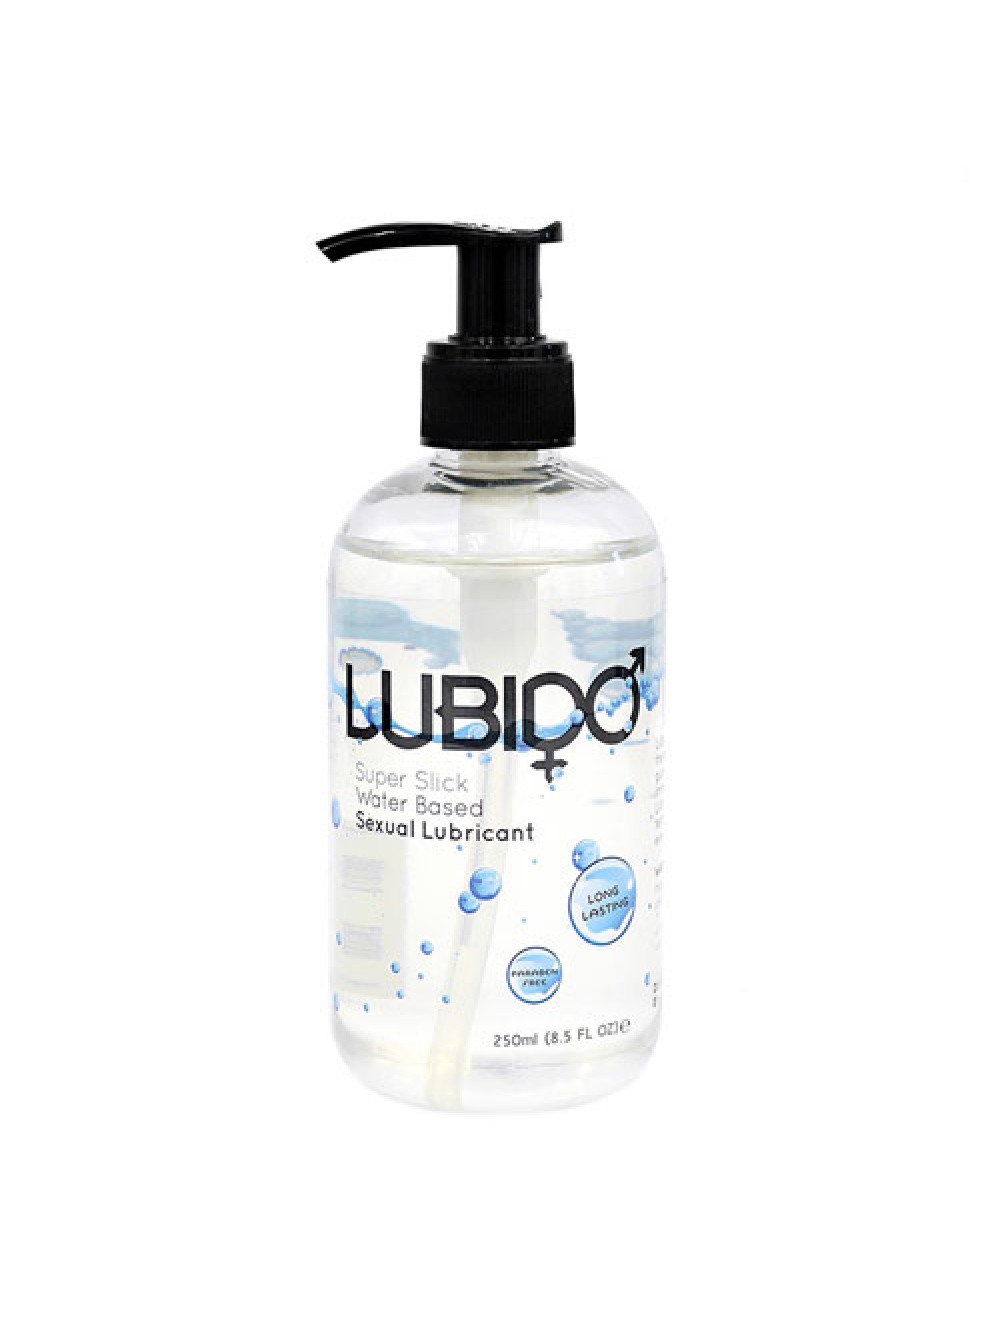 Intimate Lubricant 250ml 